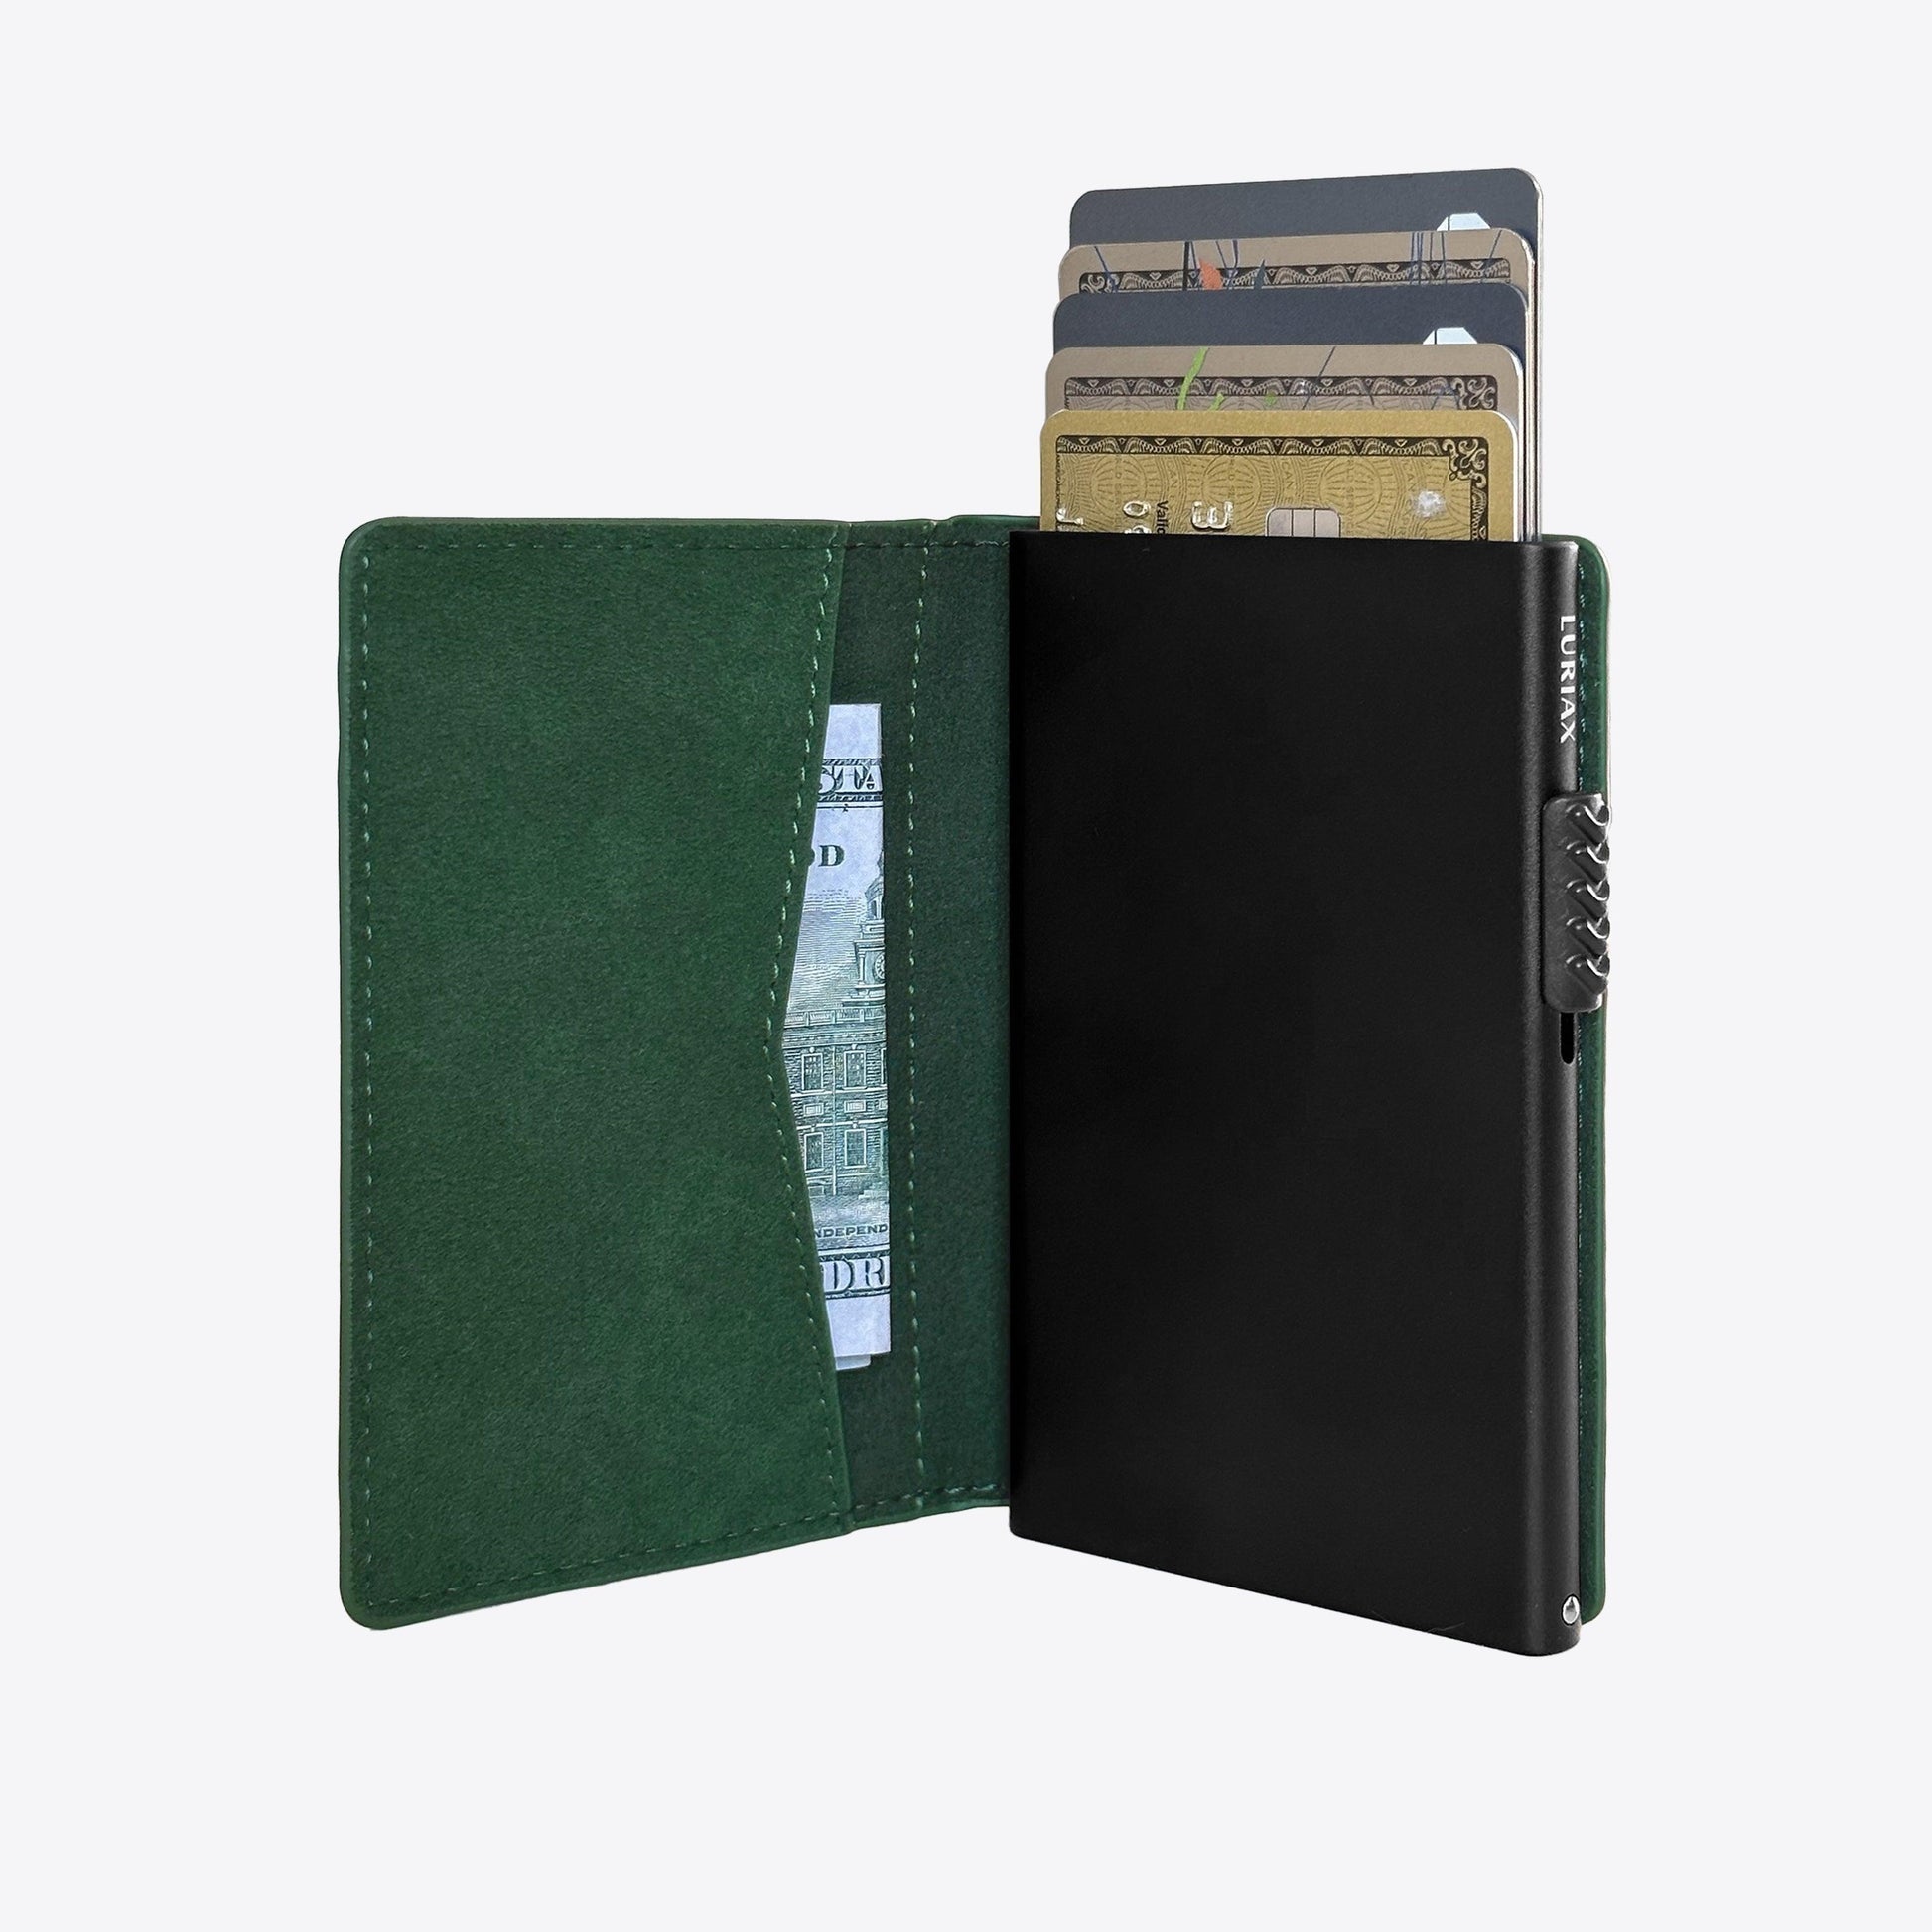 Alcantara Suede Leather iPhone Case and Accessories Collection - The Bifold Cardholder - British Racing Green - Luriax